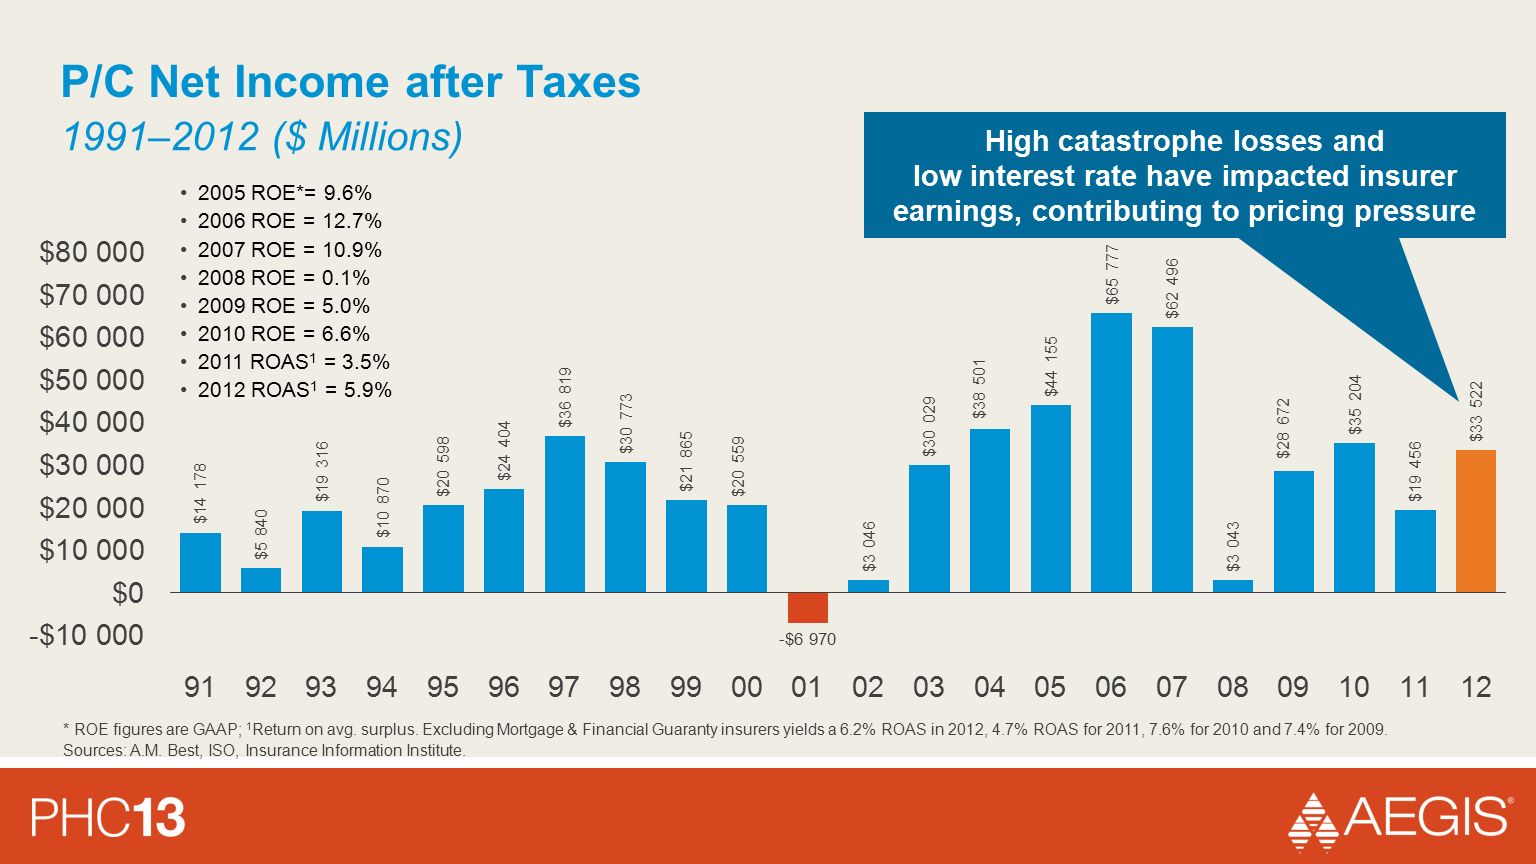 P/C Net Income after Taxes 2005 ROE*= 9.6% 2006 ROE = 12.7% 2007 ROE = 10.9% 2008 ROE = 0.1% 2009 ROE = 5.0% 2010 ROE = 6.6% 2011 ROAS 1 = 3.5% 2012 ROAS 1 = 5.9% High catastrophe losses and low interest rate have impacted insurer earnings, contributing to pricing pressure 1991–2012 ($ Millions) * ROE figures are GAAP; 1 Return on avg.